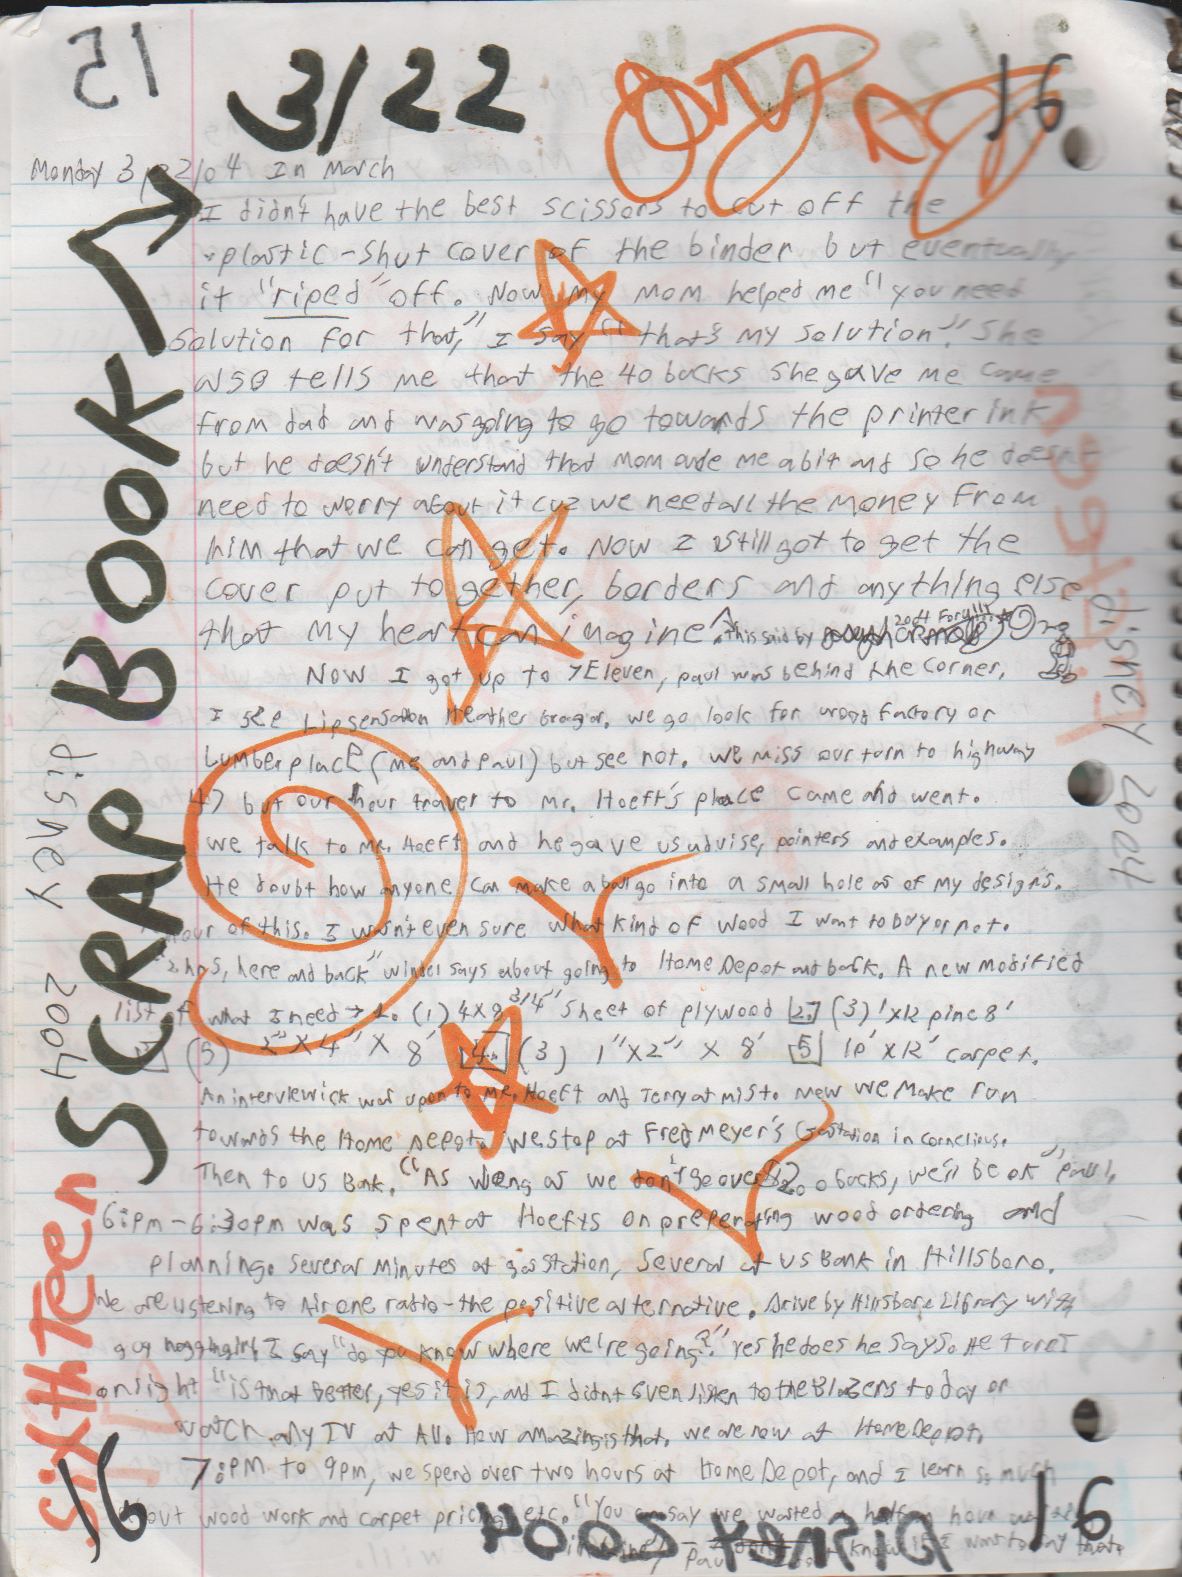 2004-01-29 - Thursday - Carpetball FGHS Senior Project Journal, Joey Arnold, Part 02, 96pages numbered, Notebook-11.png